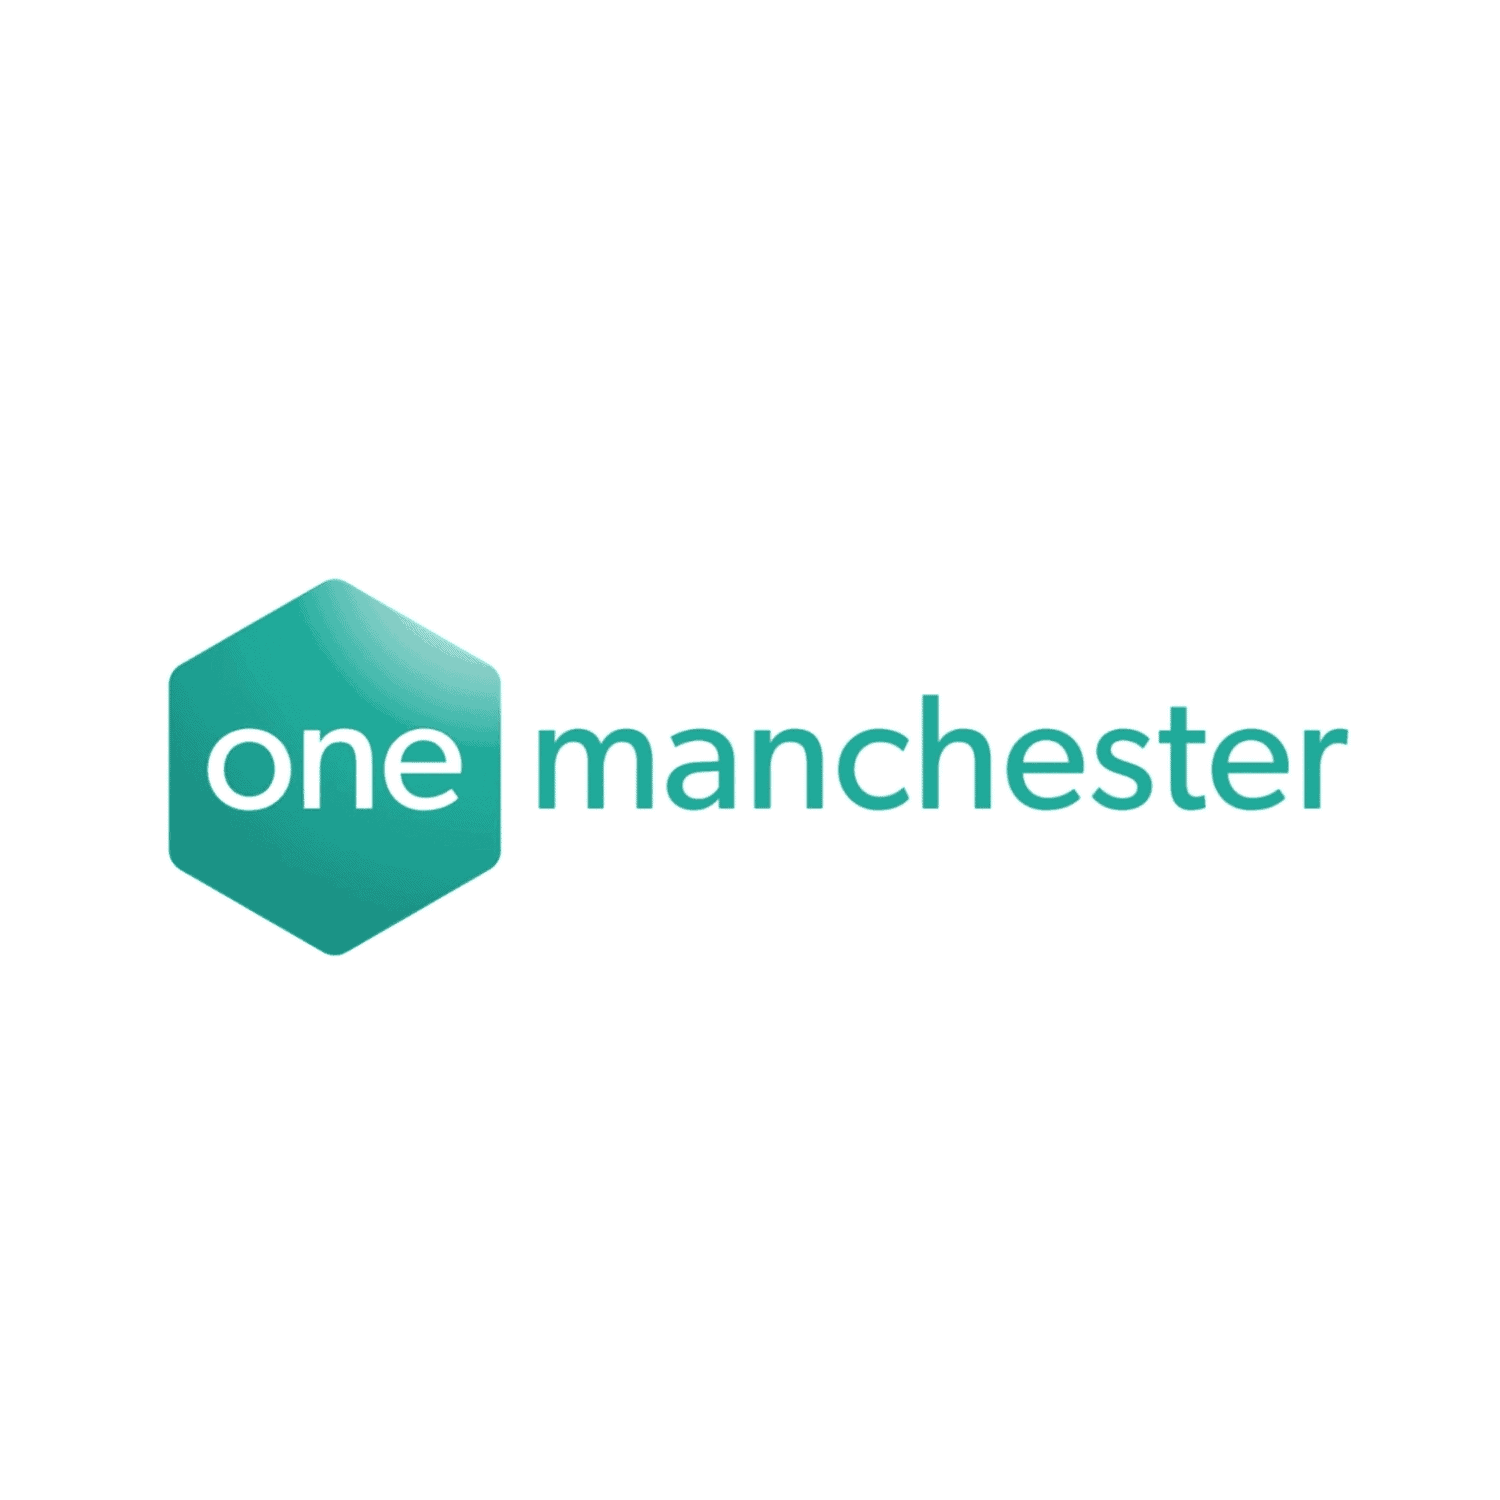 One-manchester